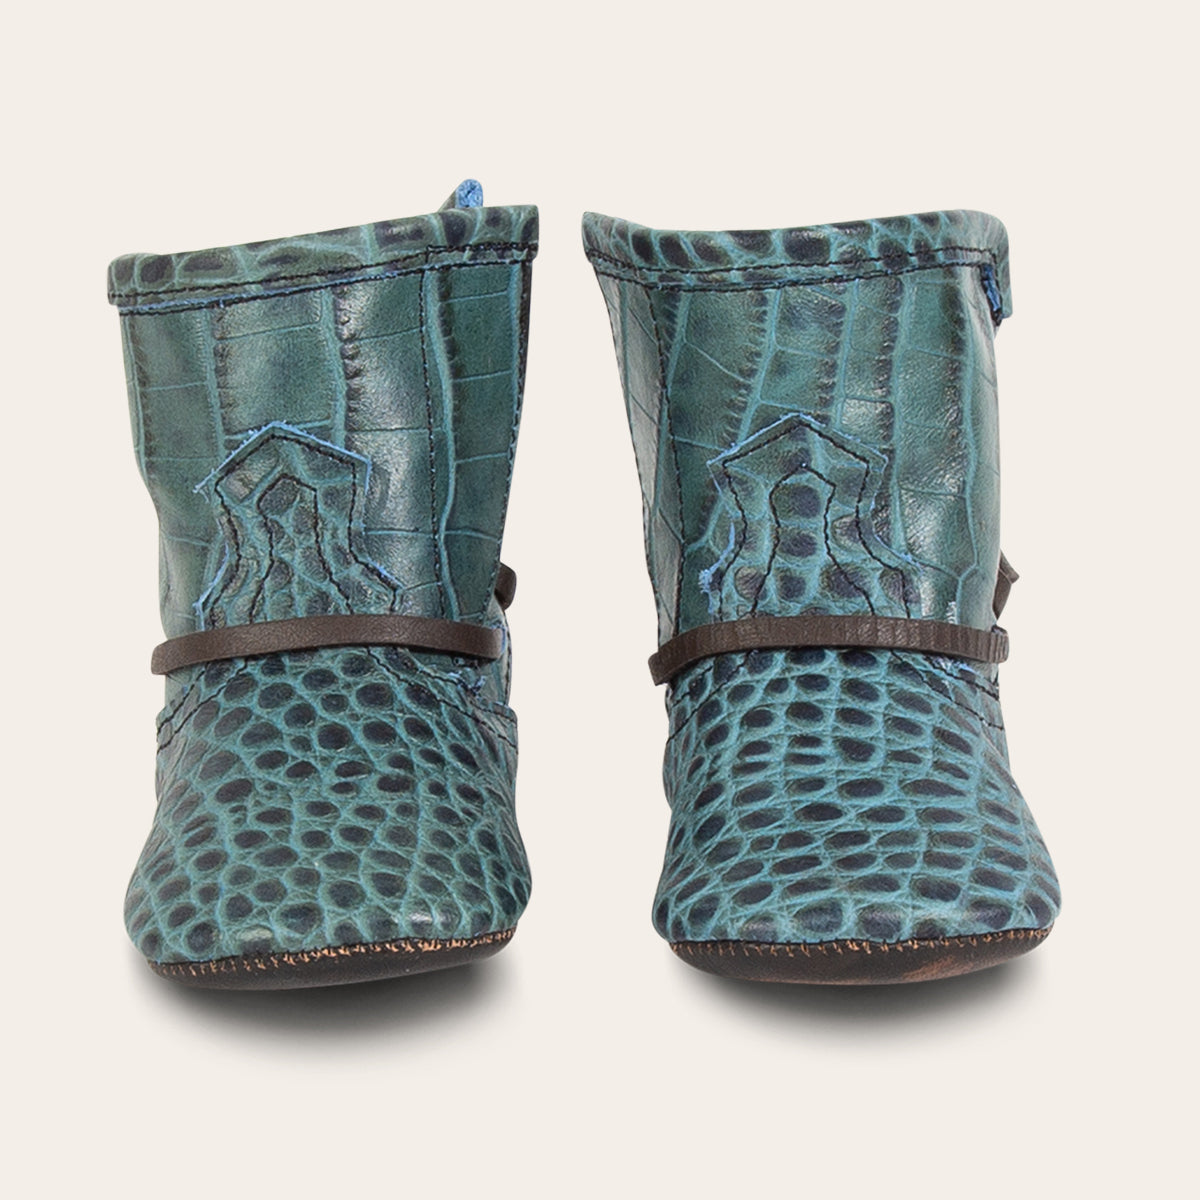 front view showing contrasting front lace detailing on FREEBIRD infant baby coal turquoise croco leather bootie  